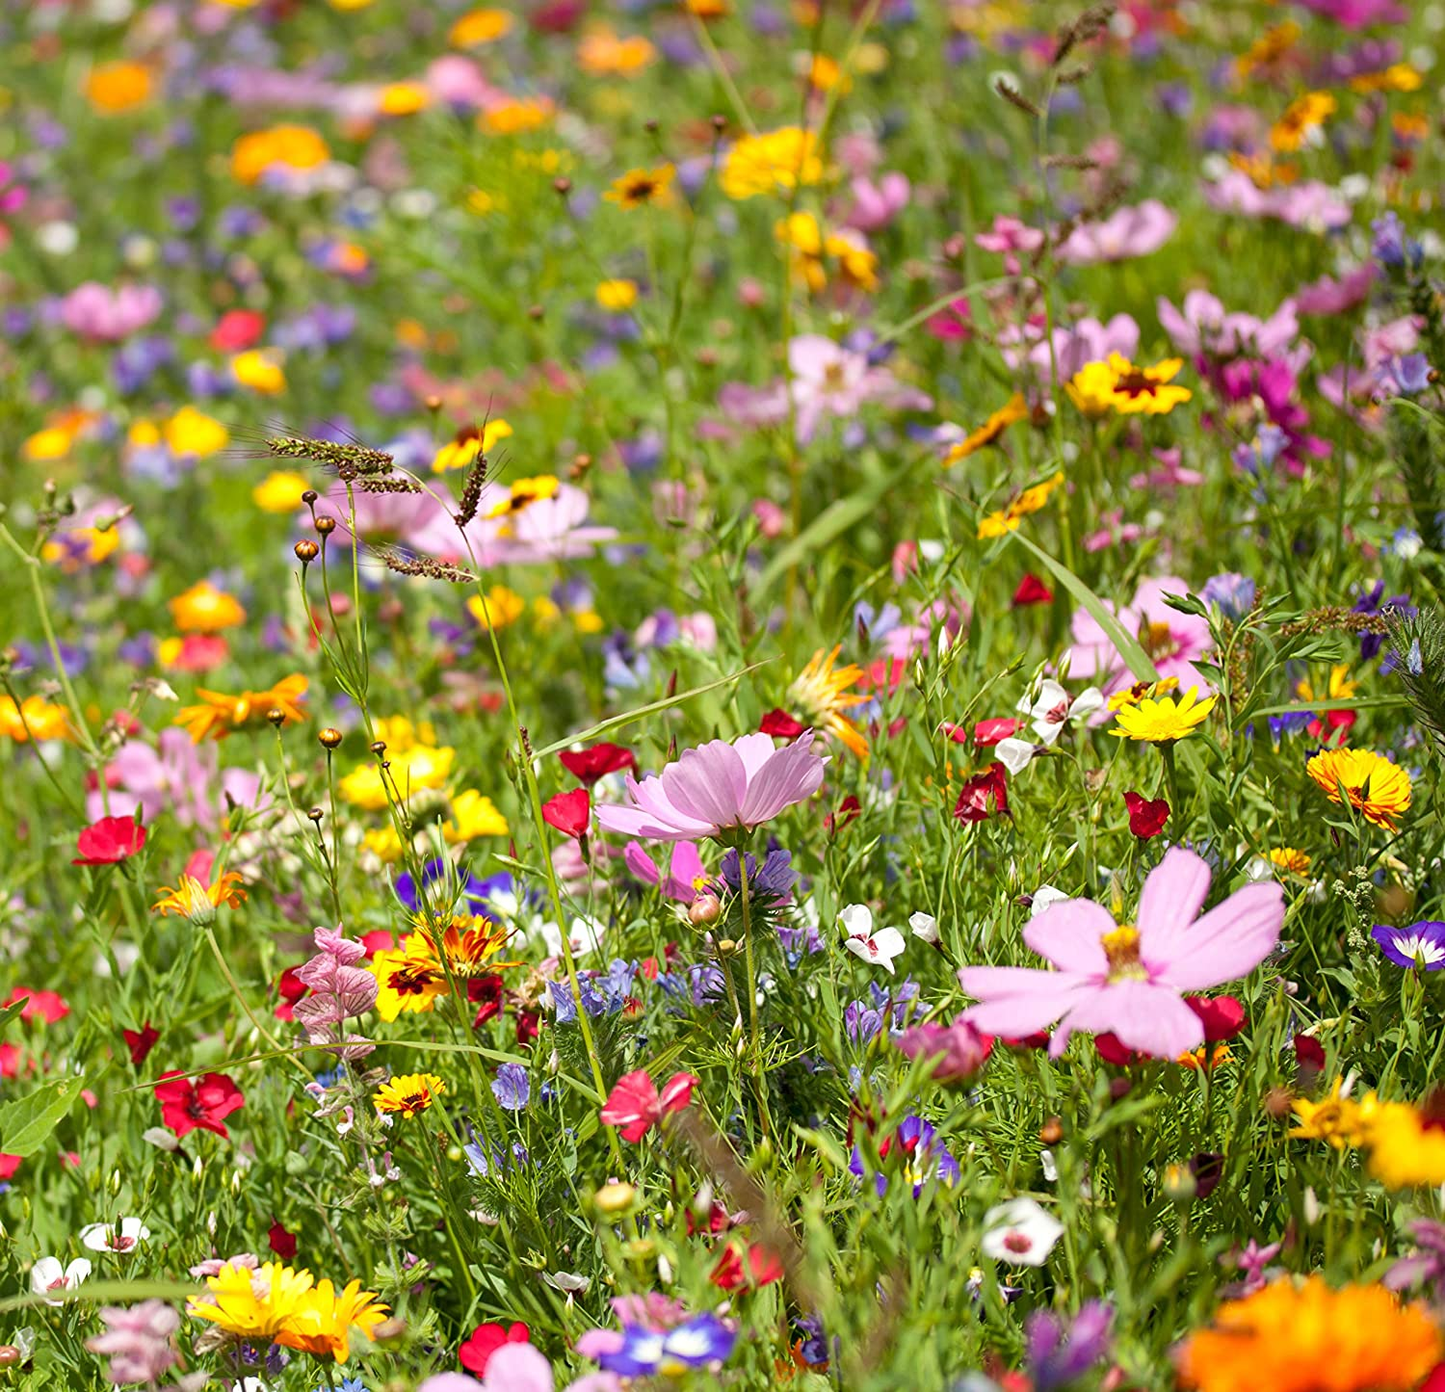 Wildflower Seeds Annual Quick Blooming Mix - Large 1 Ounce Packet over 7,500 Open Pollinated Seeds